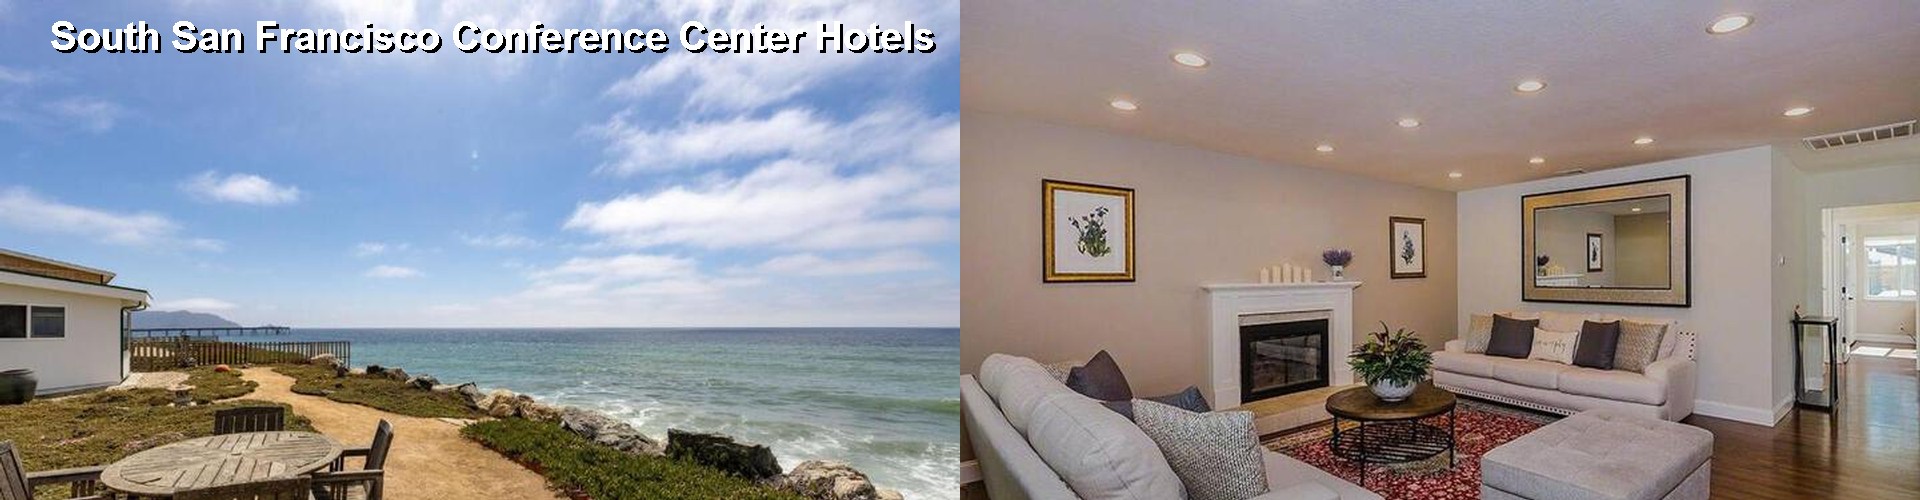 5 Best Hotels near South San Francisco Conference Center